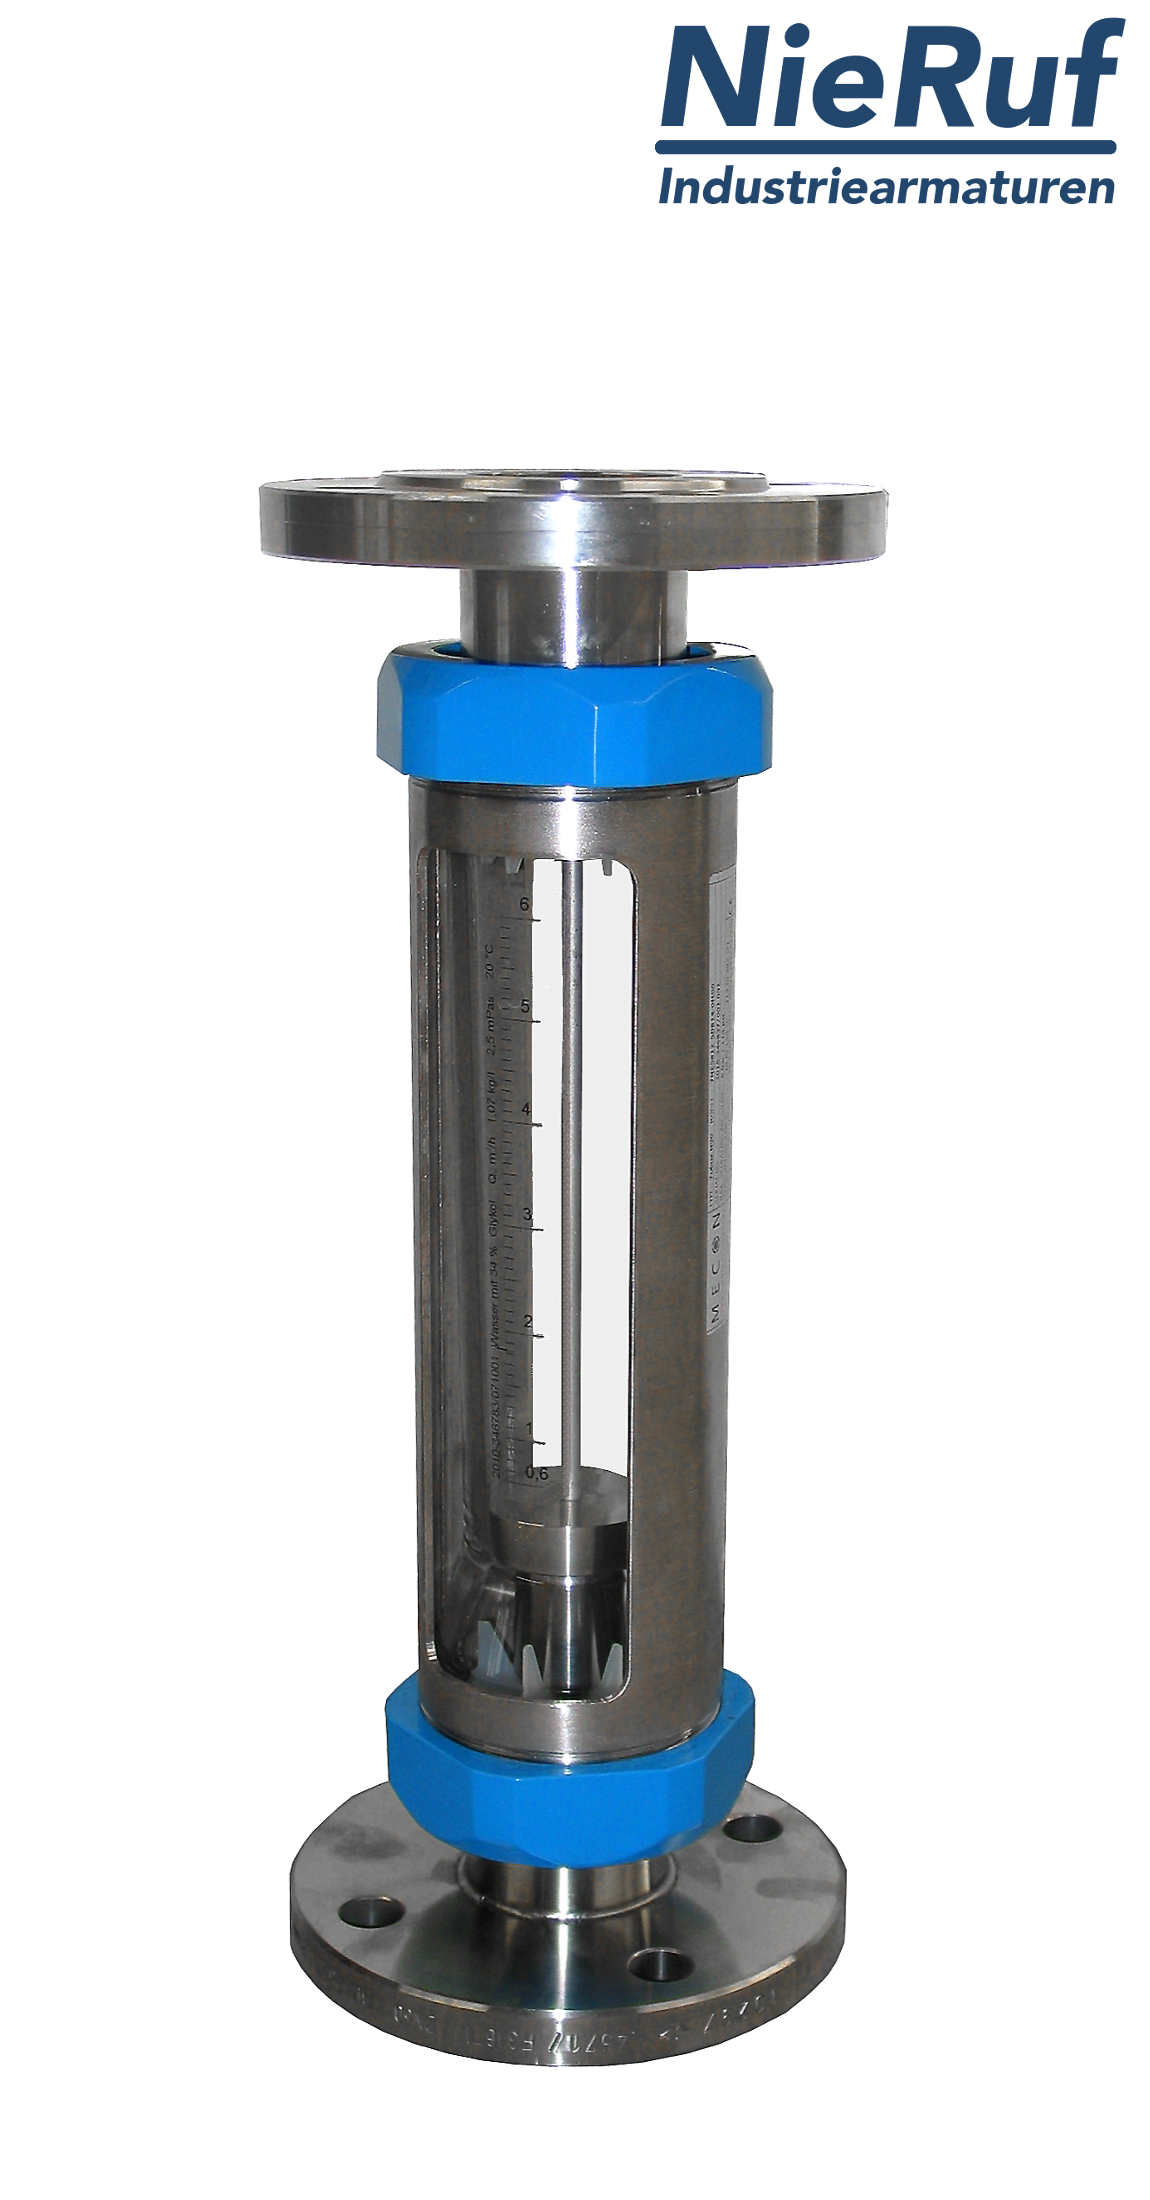 Variable area flowmeter stainless steel + borosilicate flange DN15 40.0 - 400.0 l/h water FKM